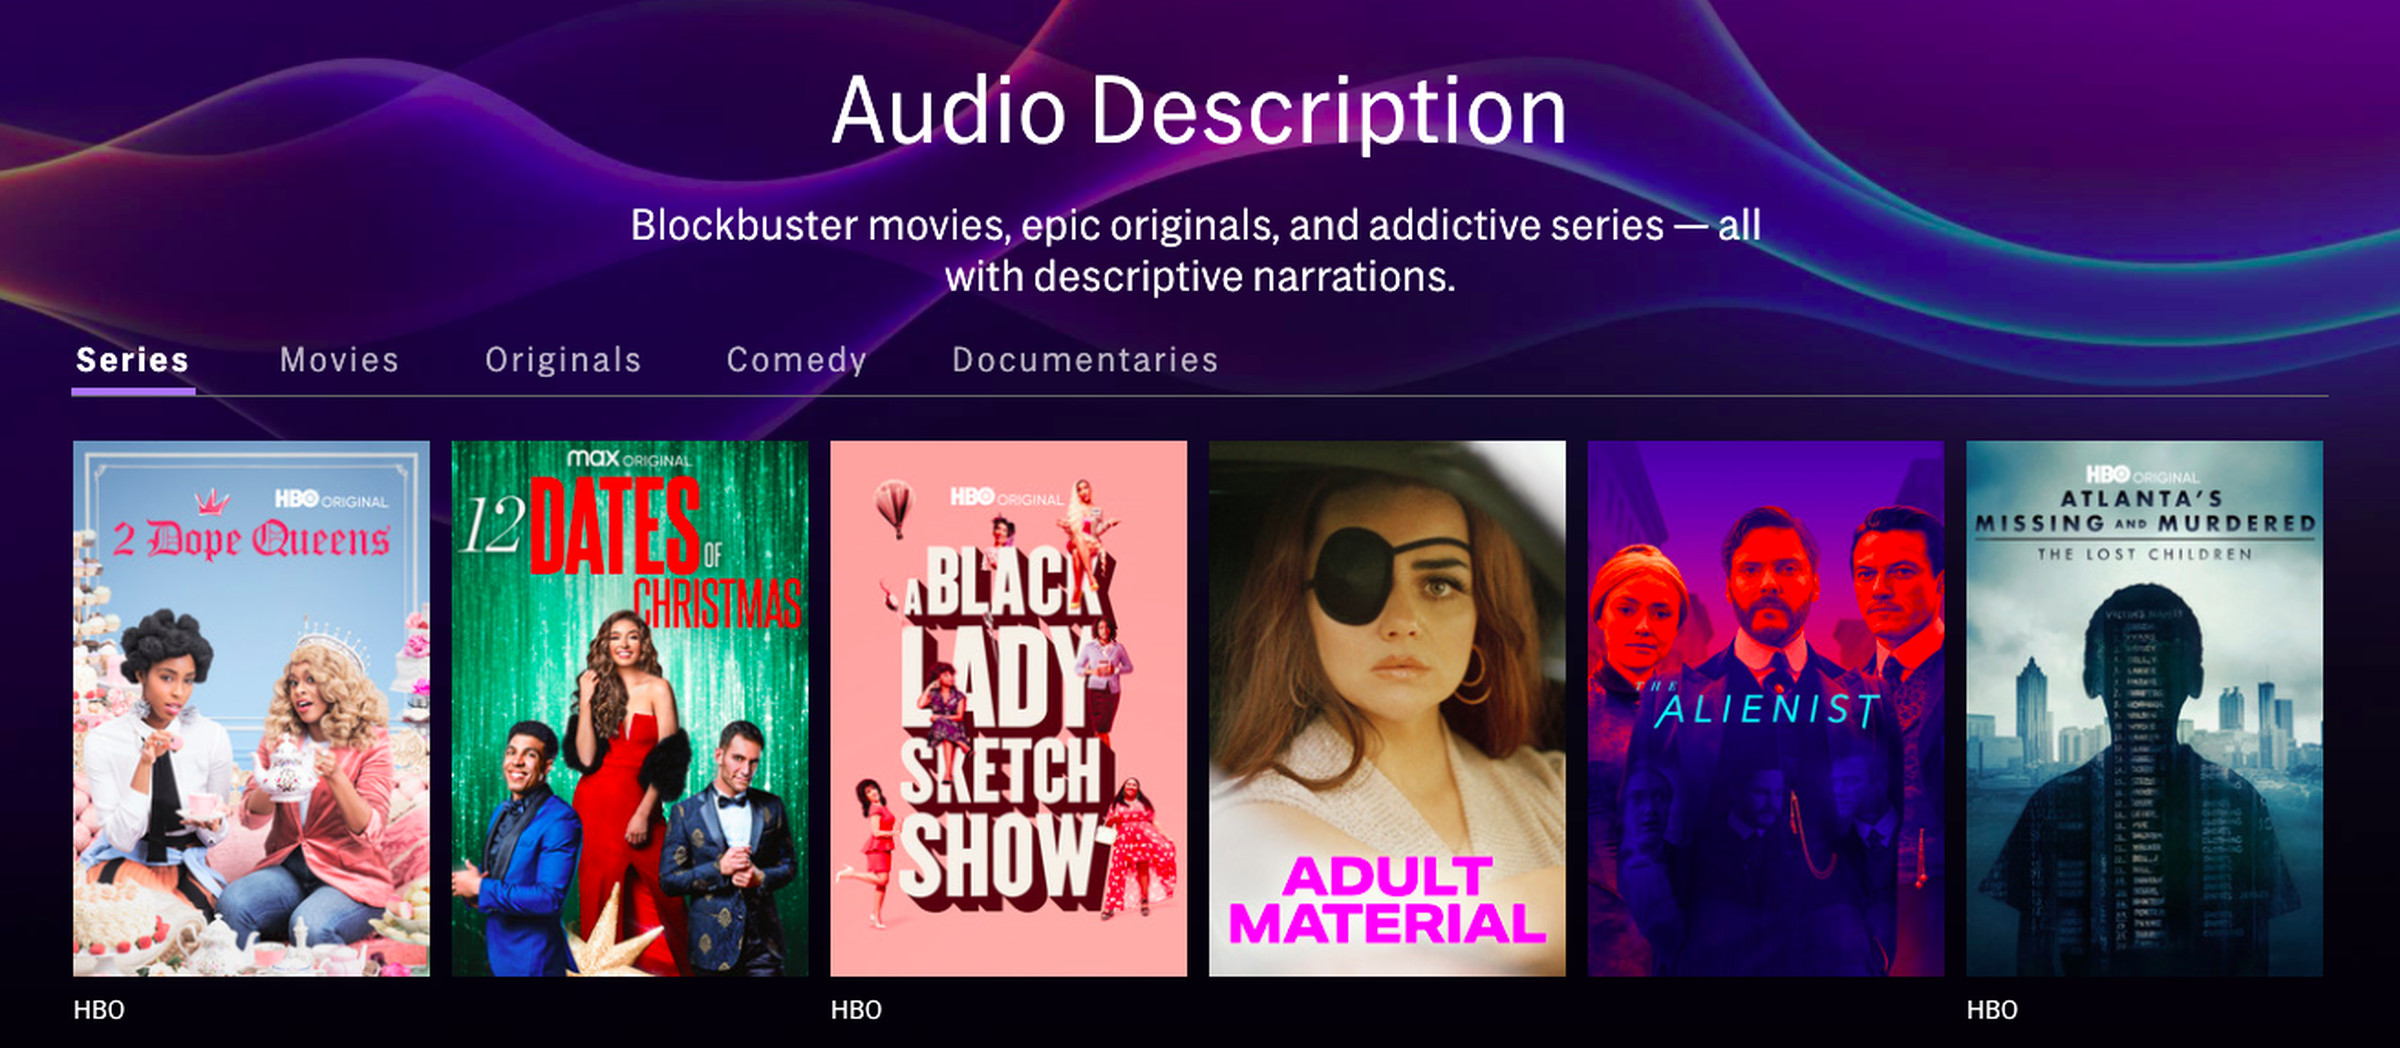 A page on the HBO Max site titled “Audio Description” that says “Blockbuster movies, epic originals, and addictive series – all with descriptive narrations. There are tabs for series, movies, originals, comedy, and documentaries. 2 Dope Queens, 12 Dates of Christmas, A Black Lady Sketch Show, Adult Material, The Alienist, and Atlanta’s Missing and Murdered are shown in the first row.